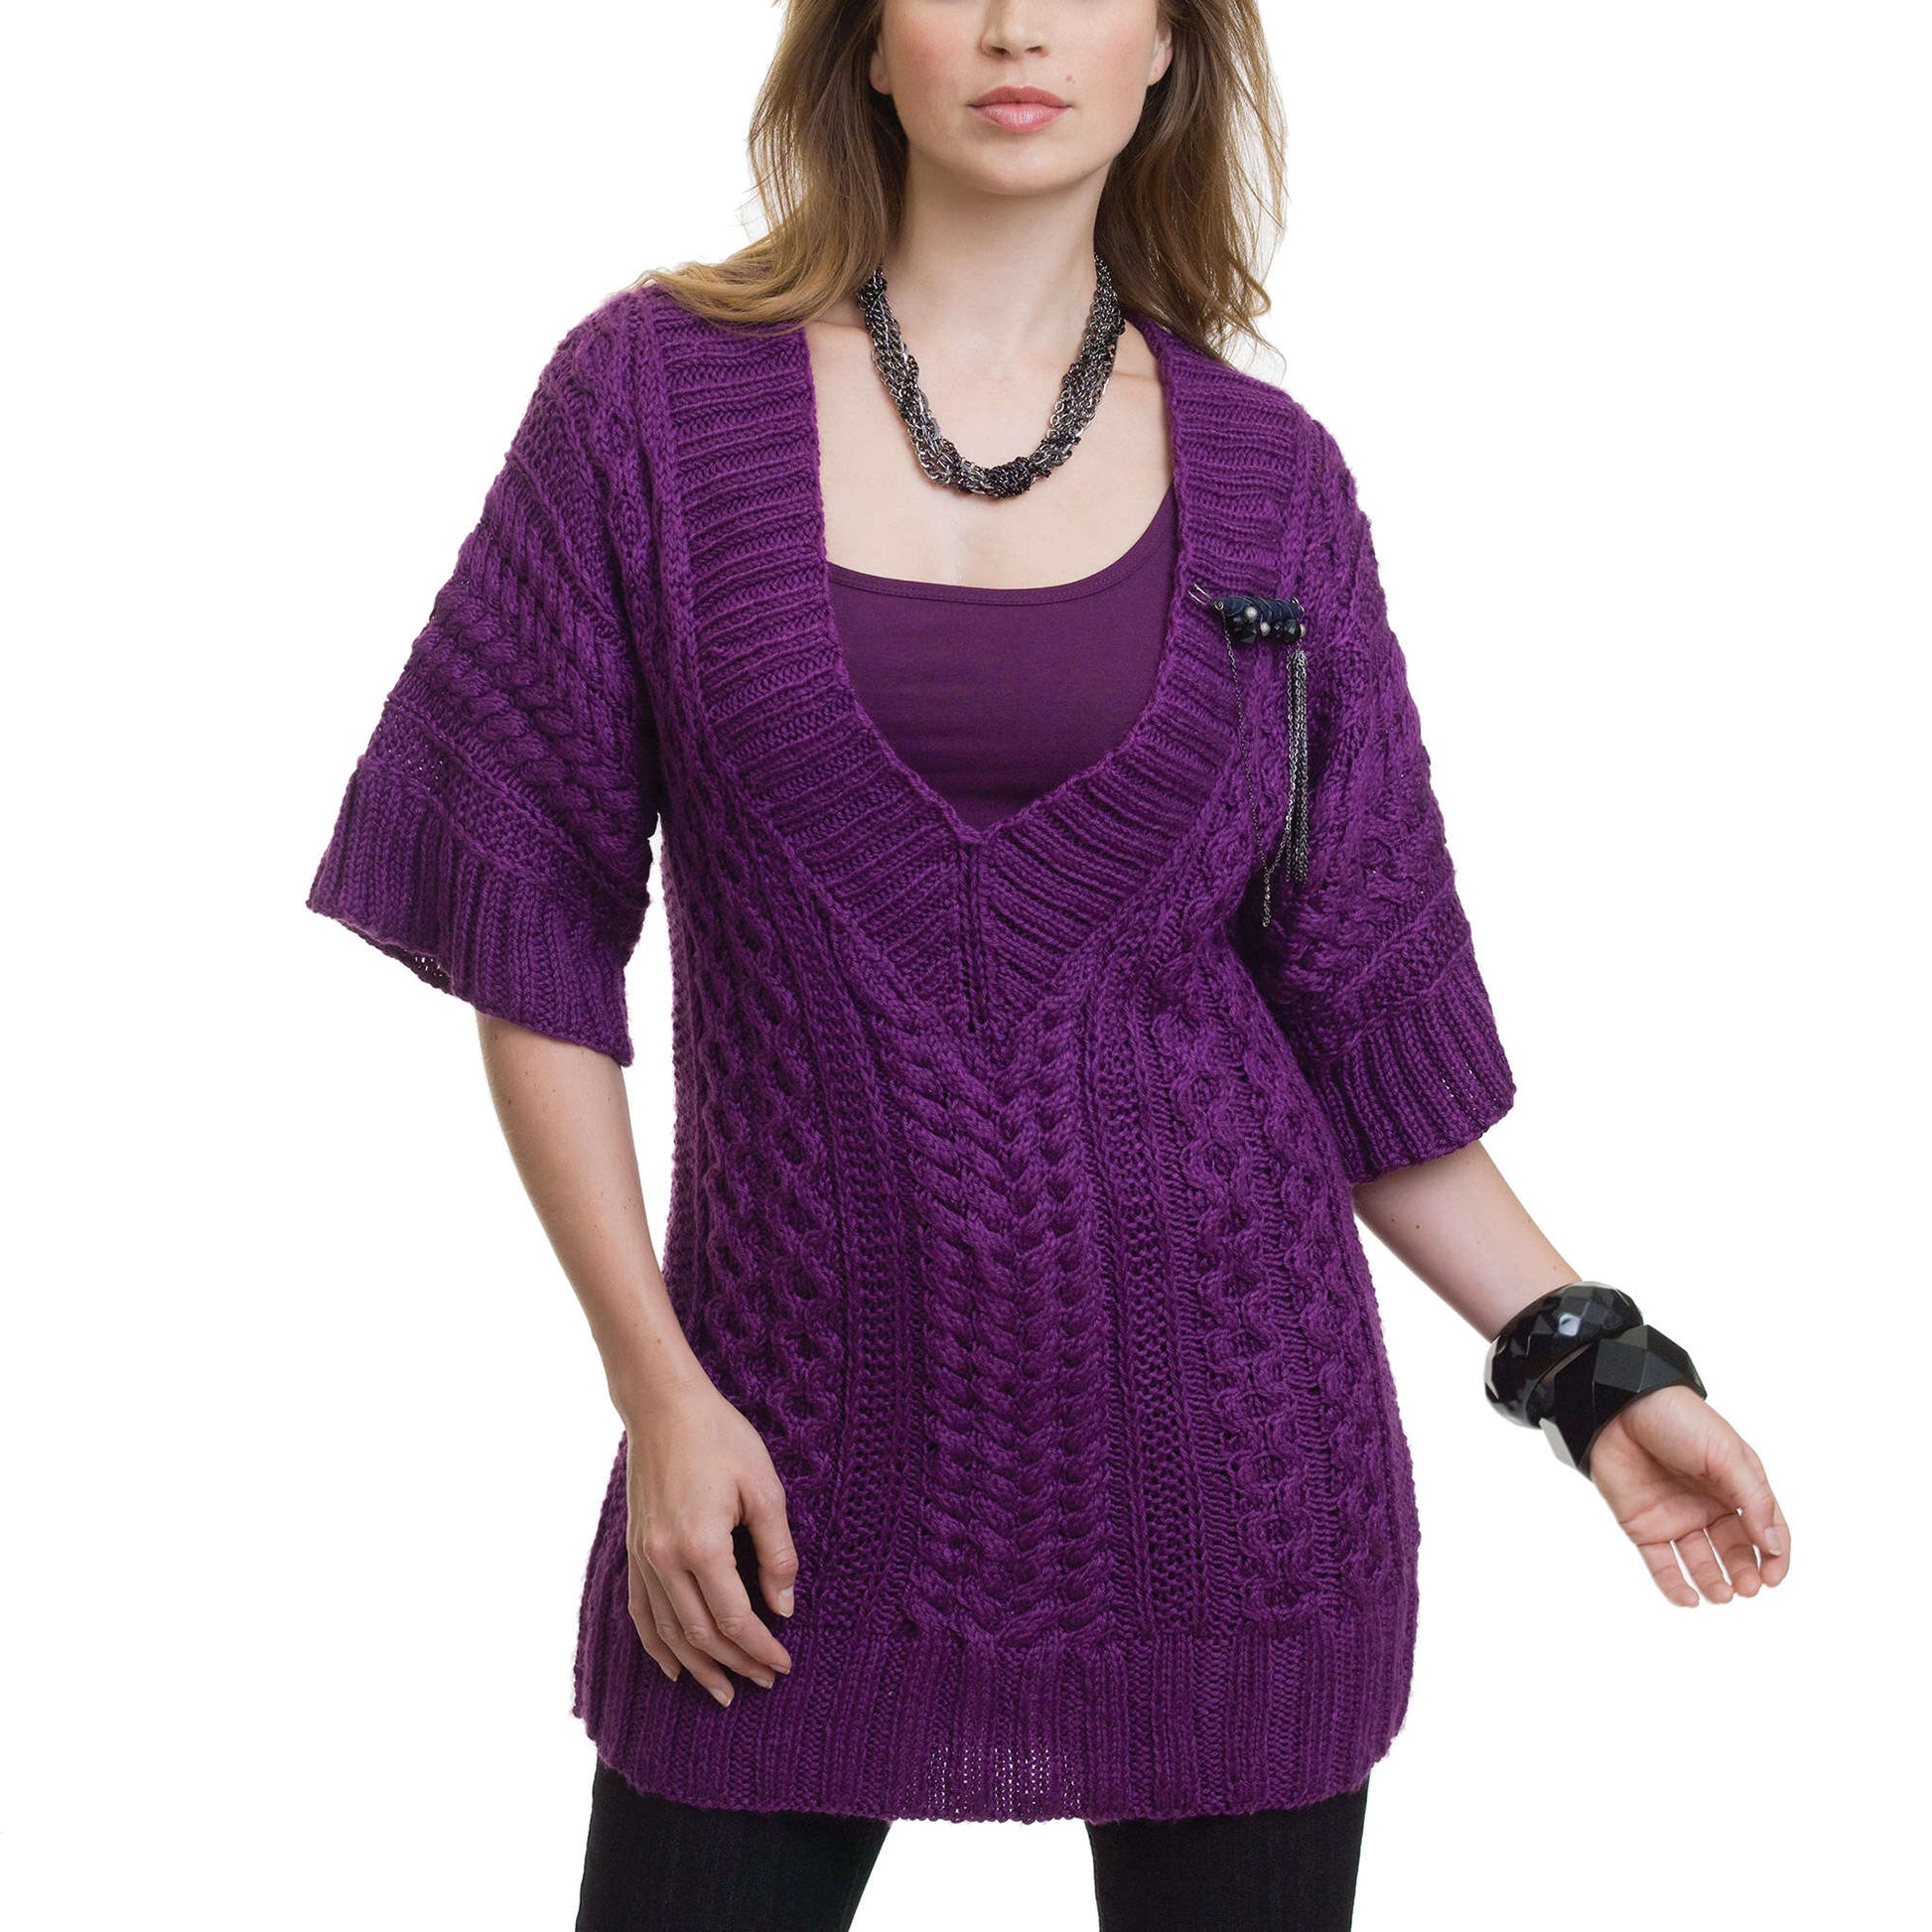 Free Caron Knit Cabled Tunic Pattern